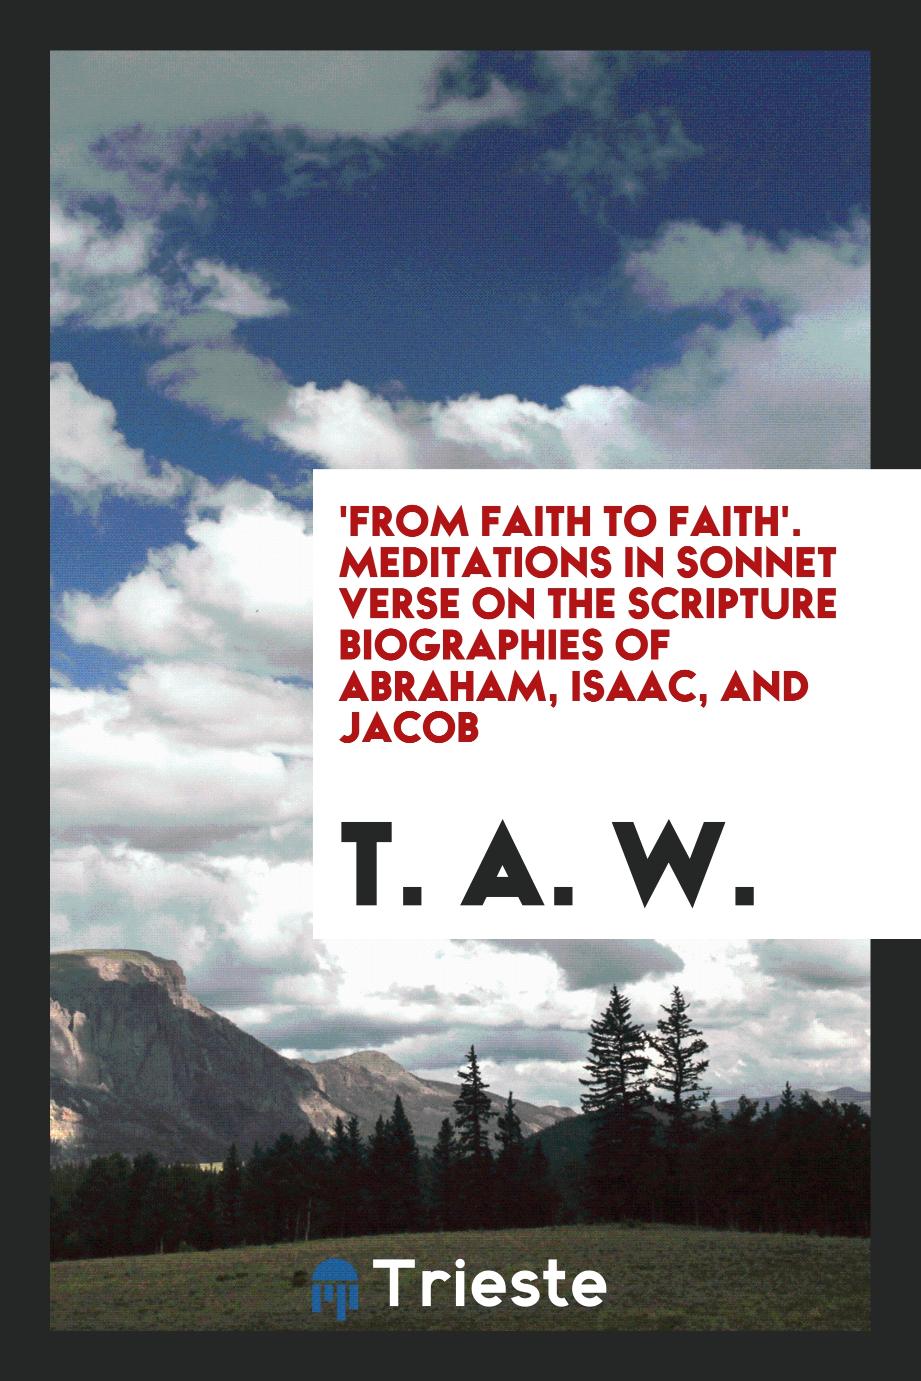 'From faith to faith'. Meditations in sonnet verse on the Scripture biographies of Abraham, Isaac, and Jacob